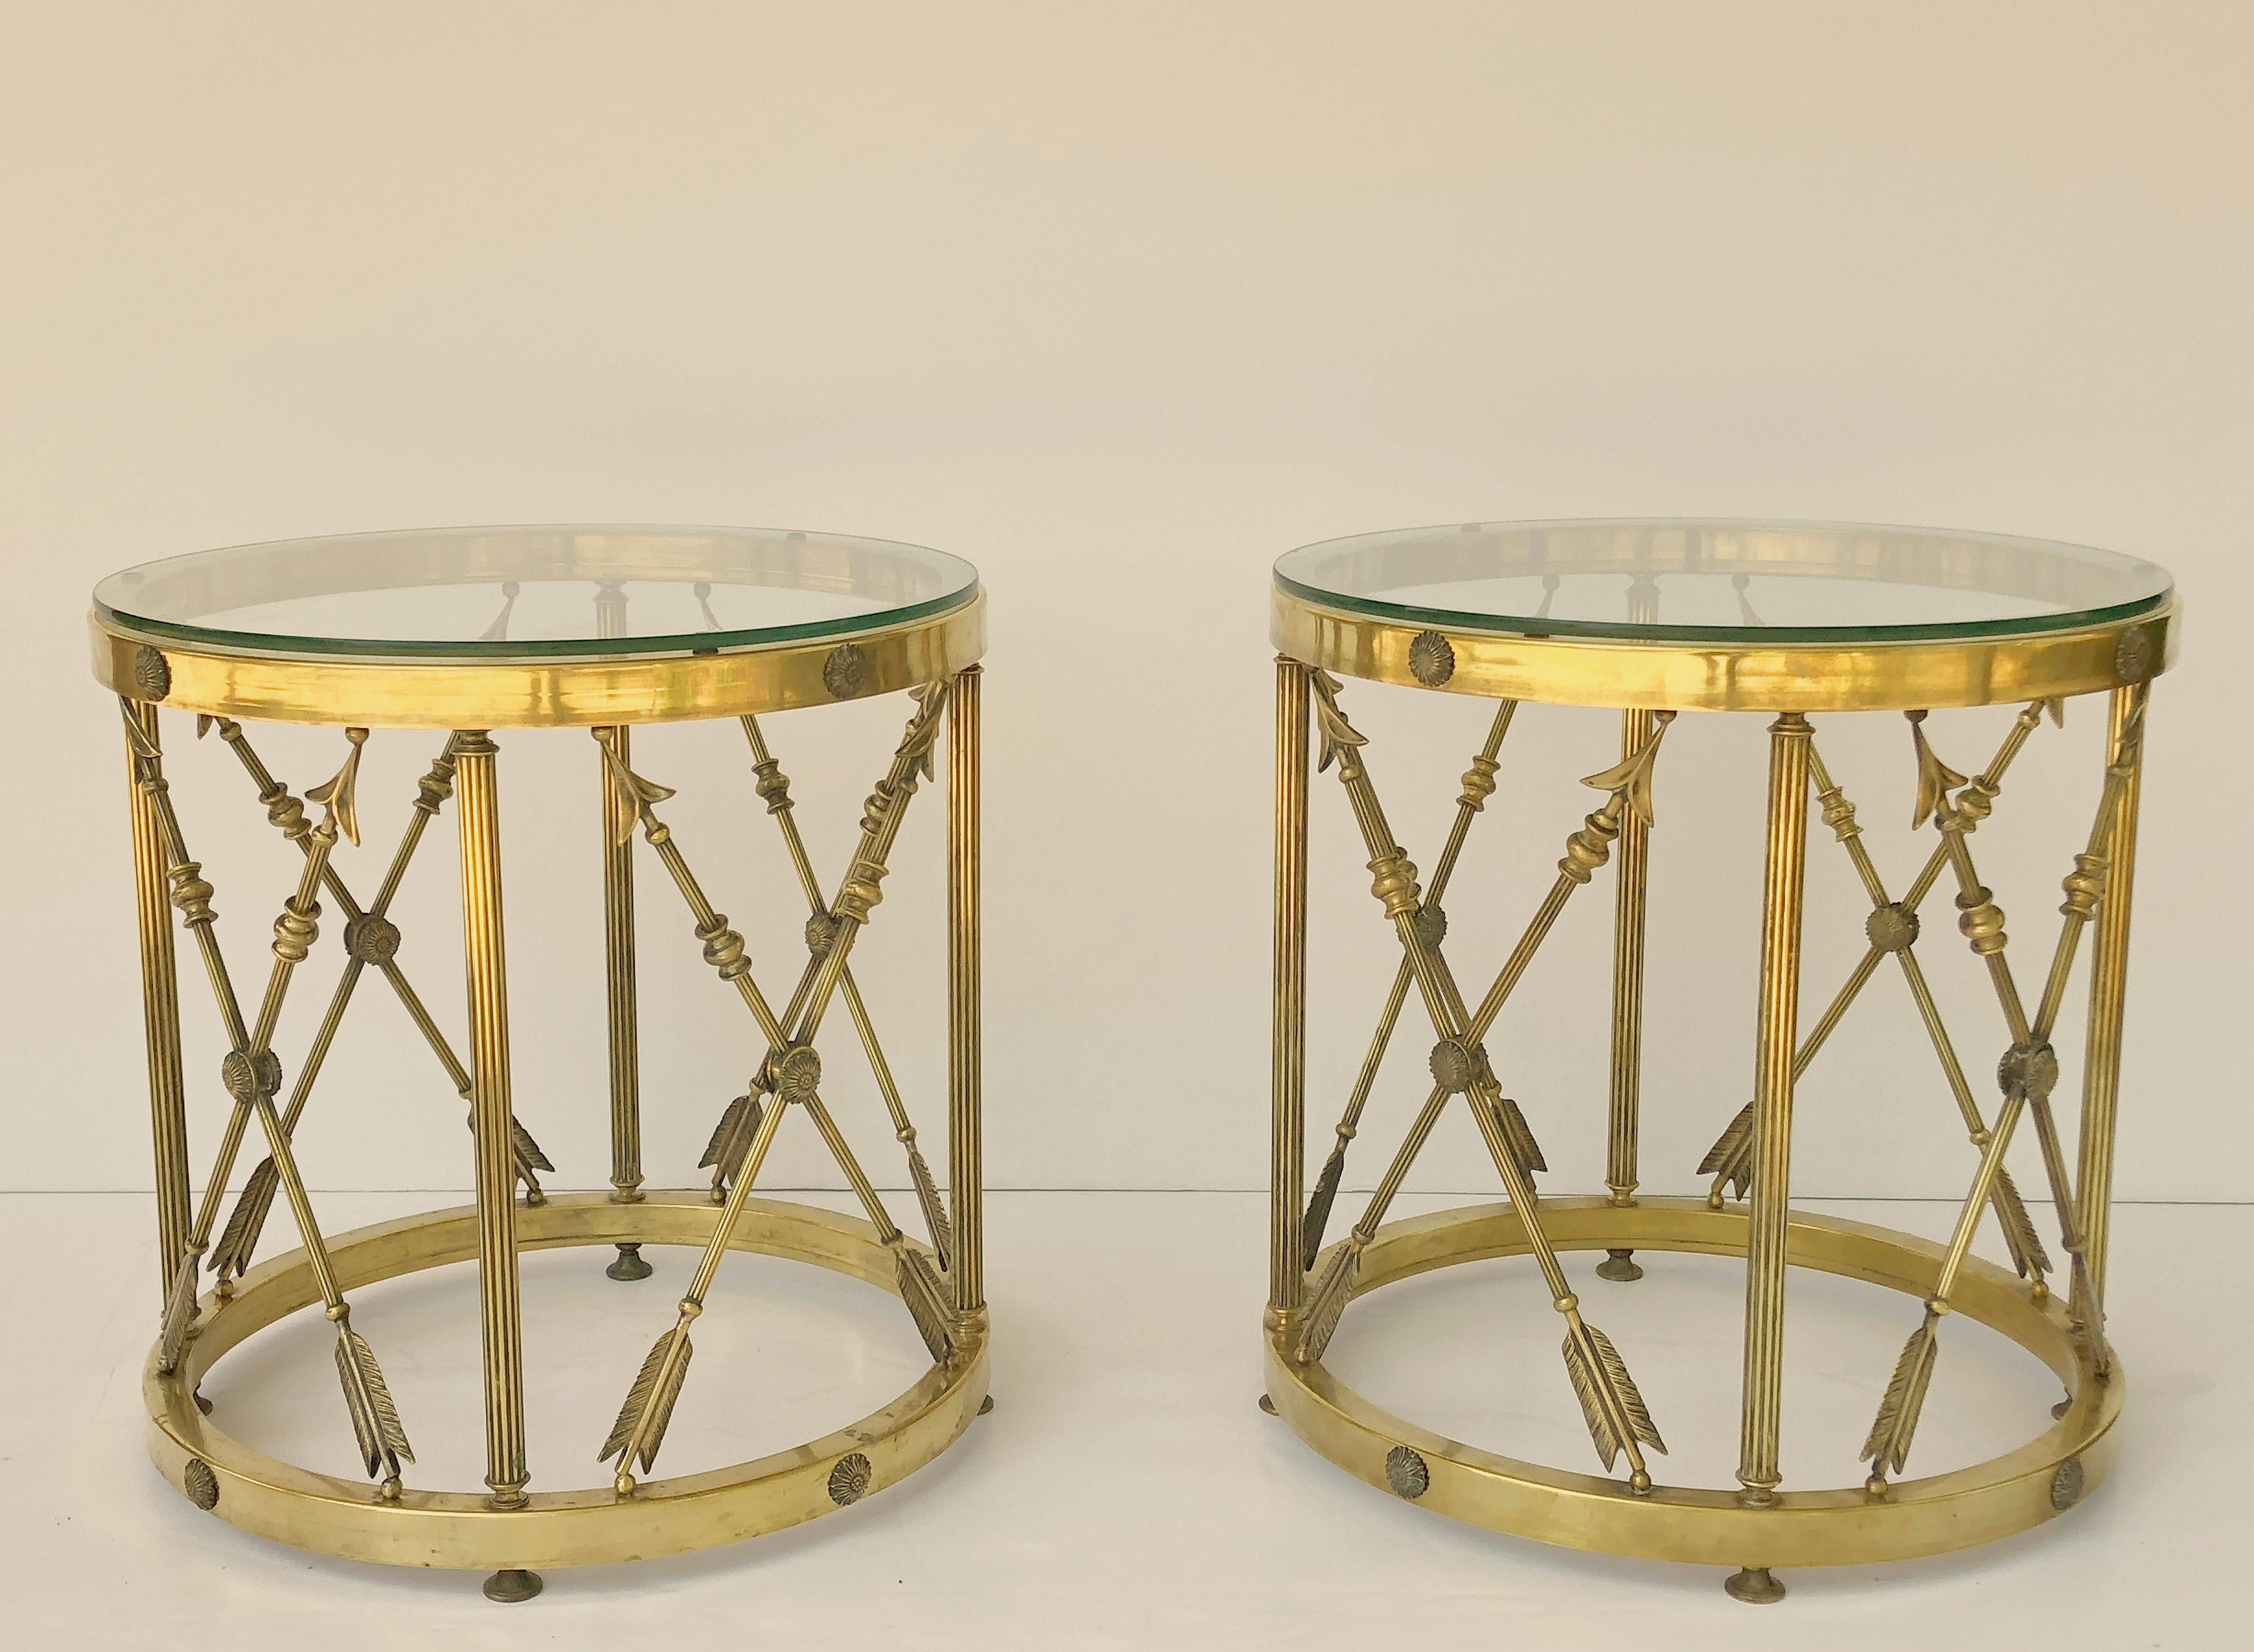 Neoclassical English Round Occasional Table of Brass and Glass 